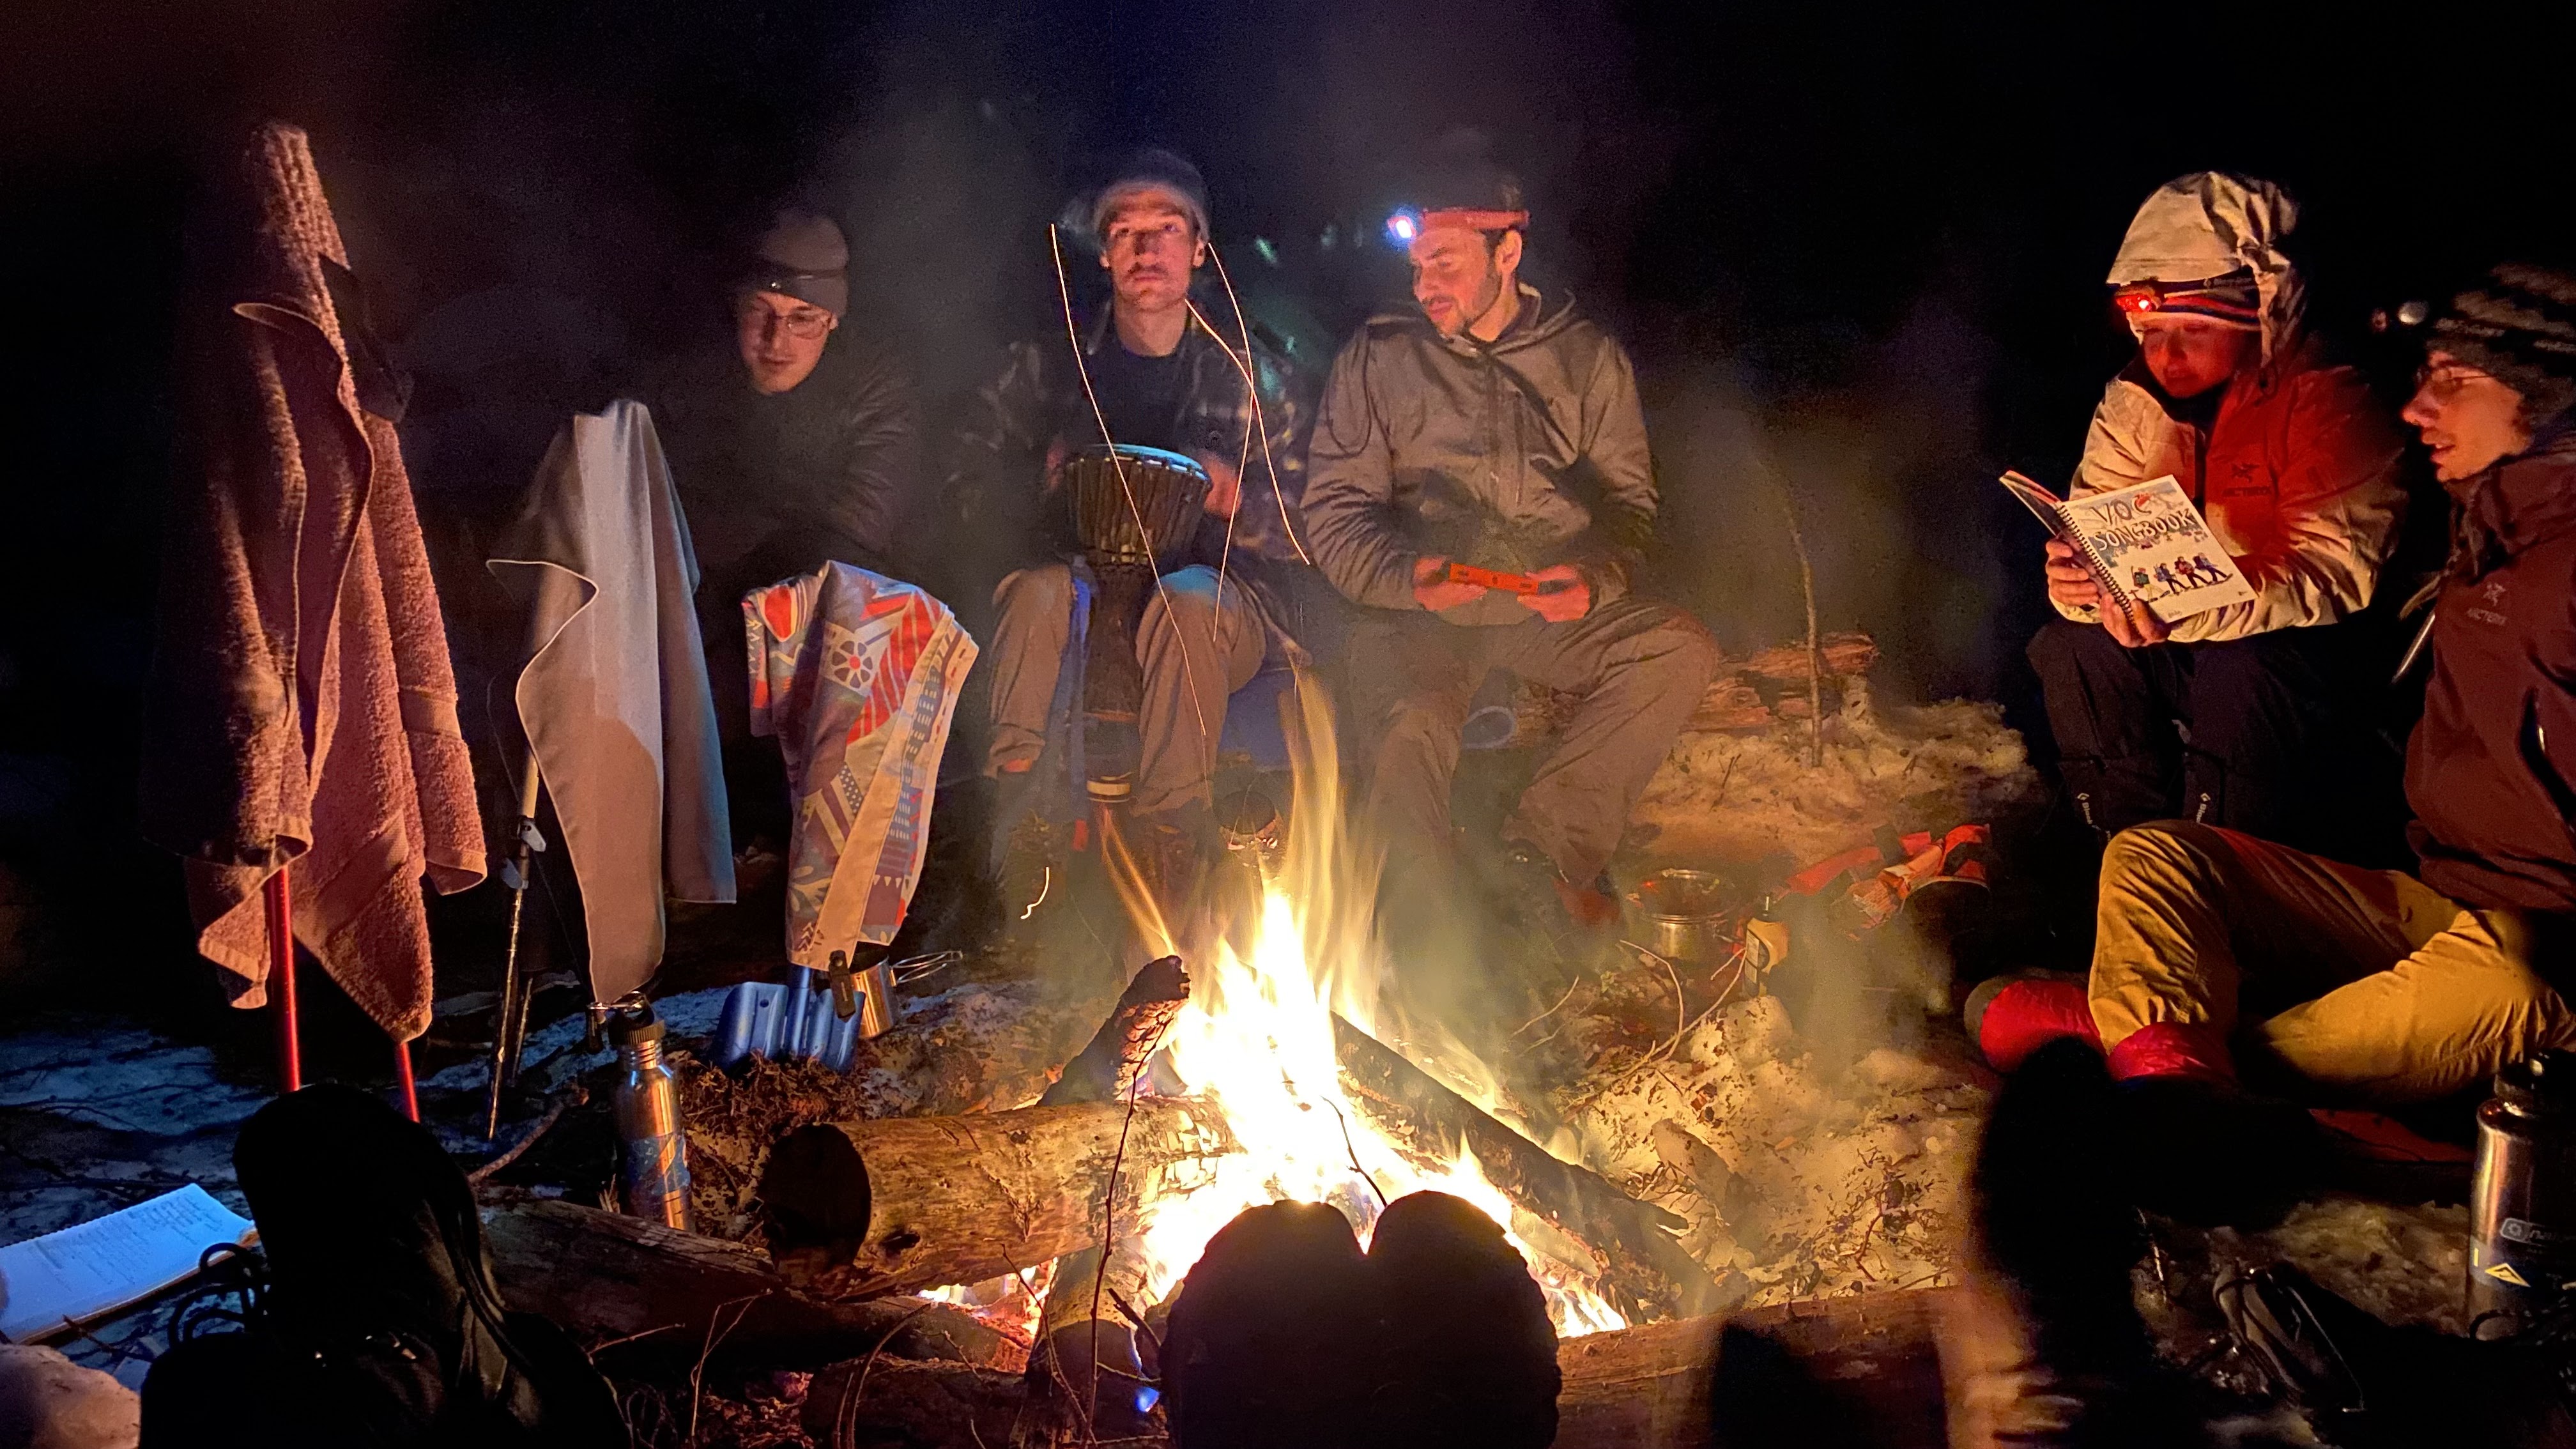 Singing around the fire. Bringing extra VOC songbooks would've been a move. Photo by Siddharth